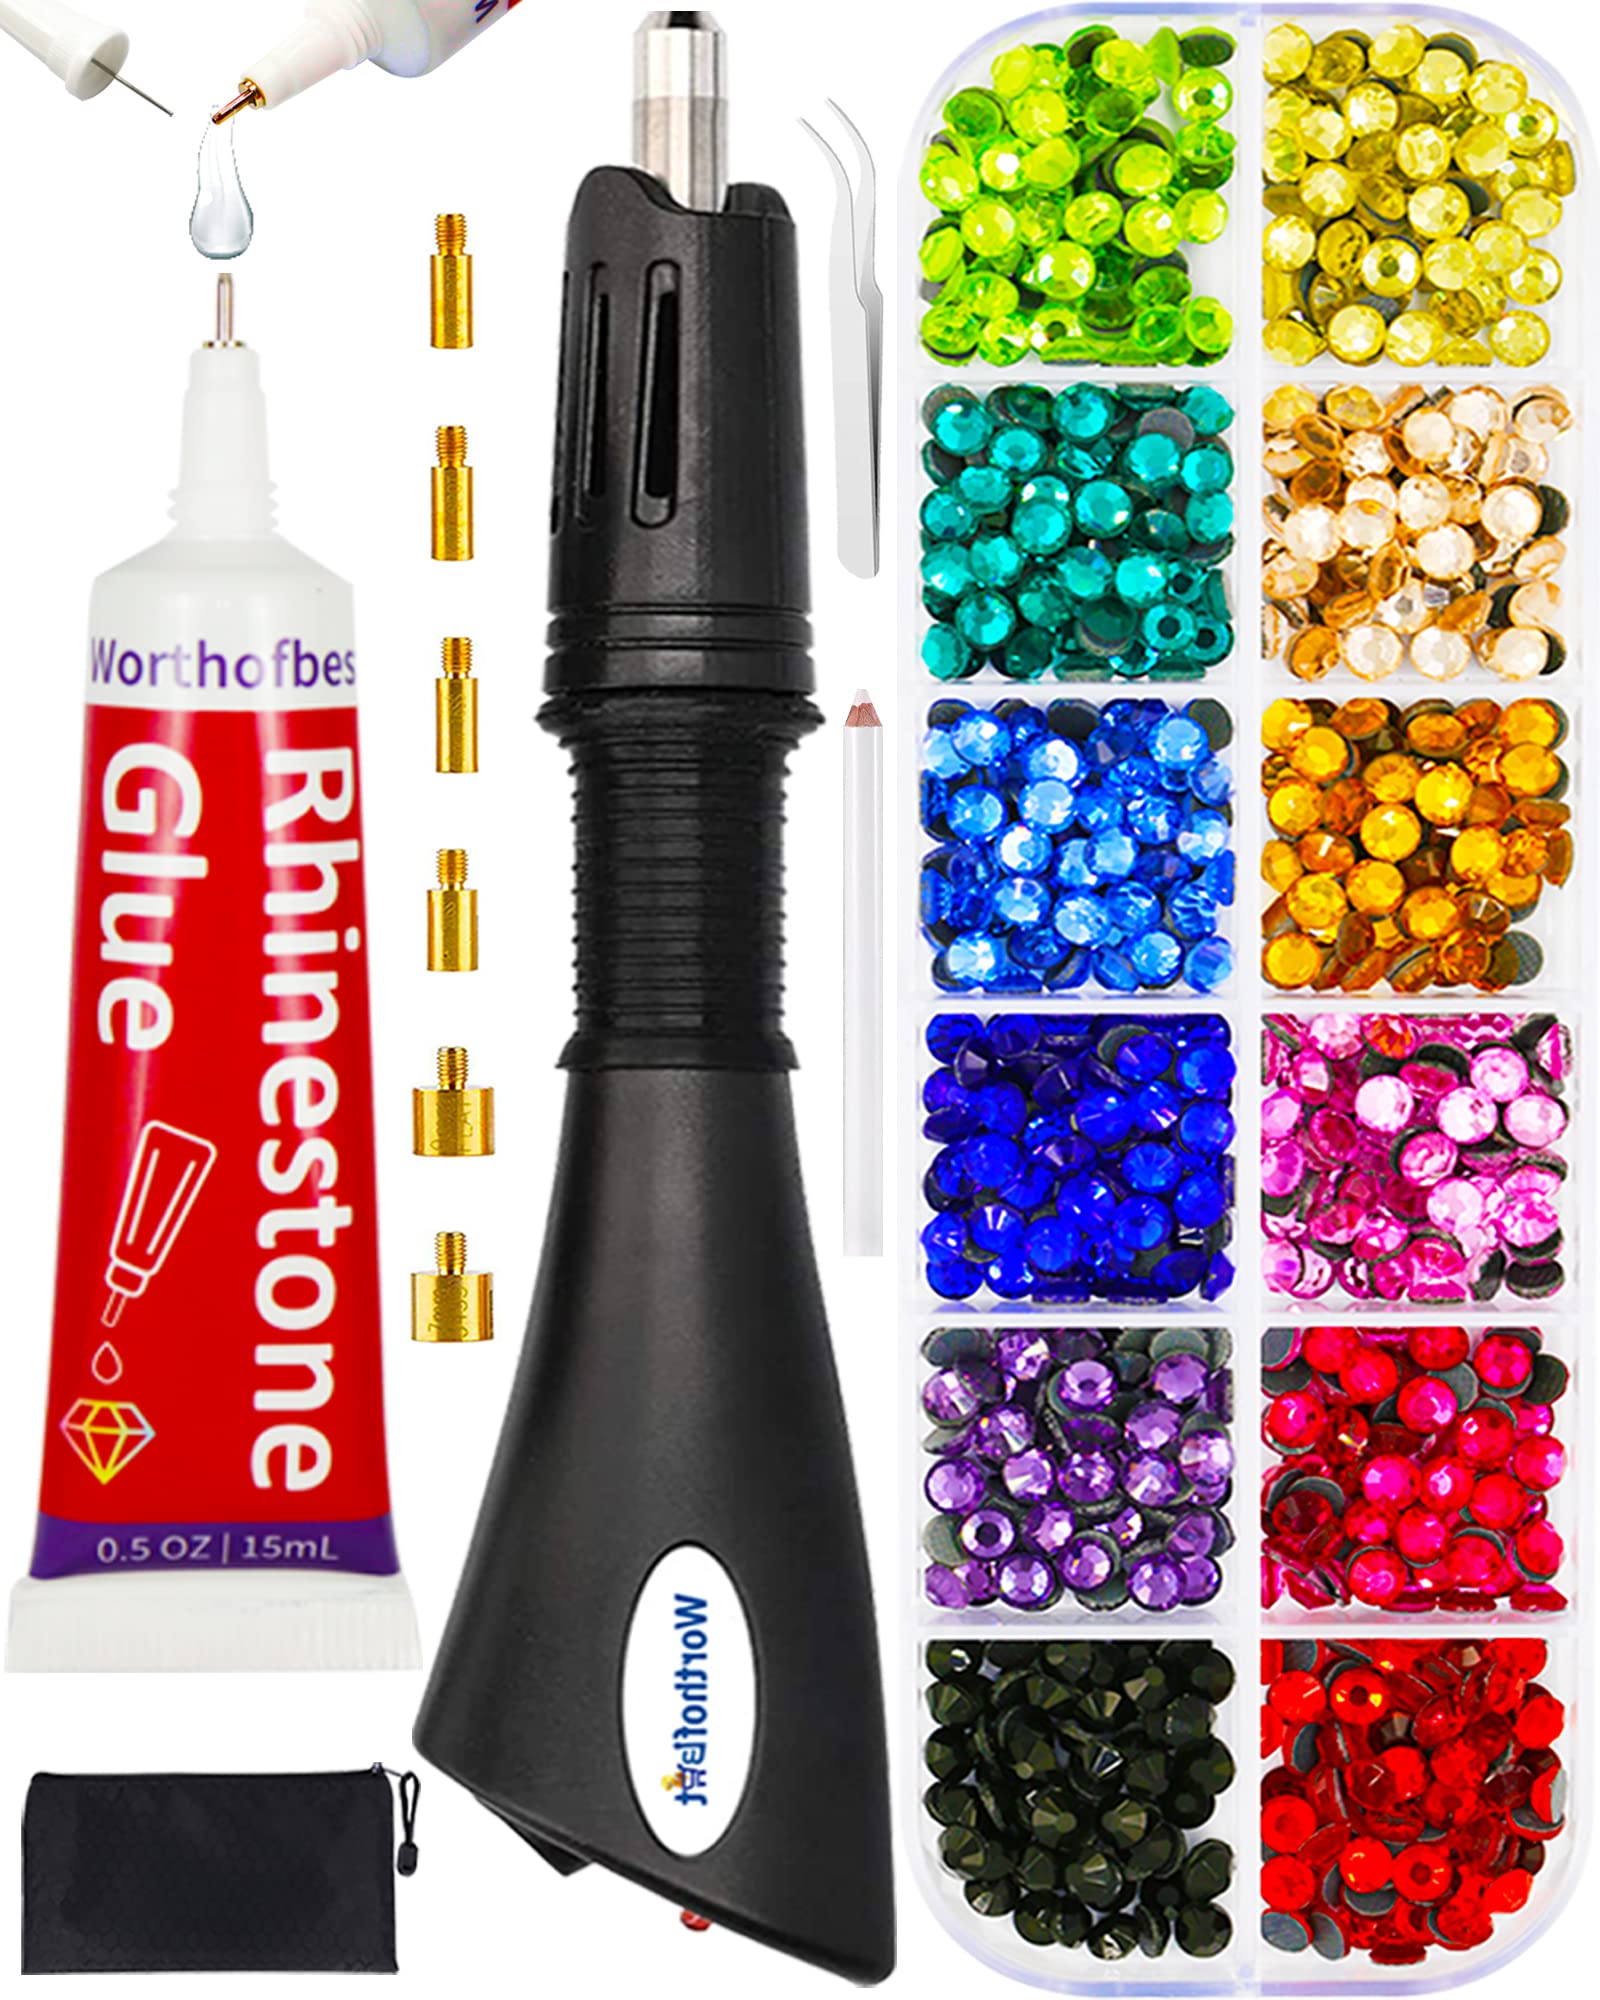 Rhinestones for Crafts Clothes Bedazzler Kit with Rhinestones